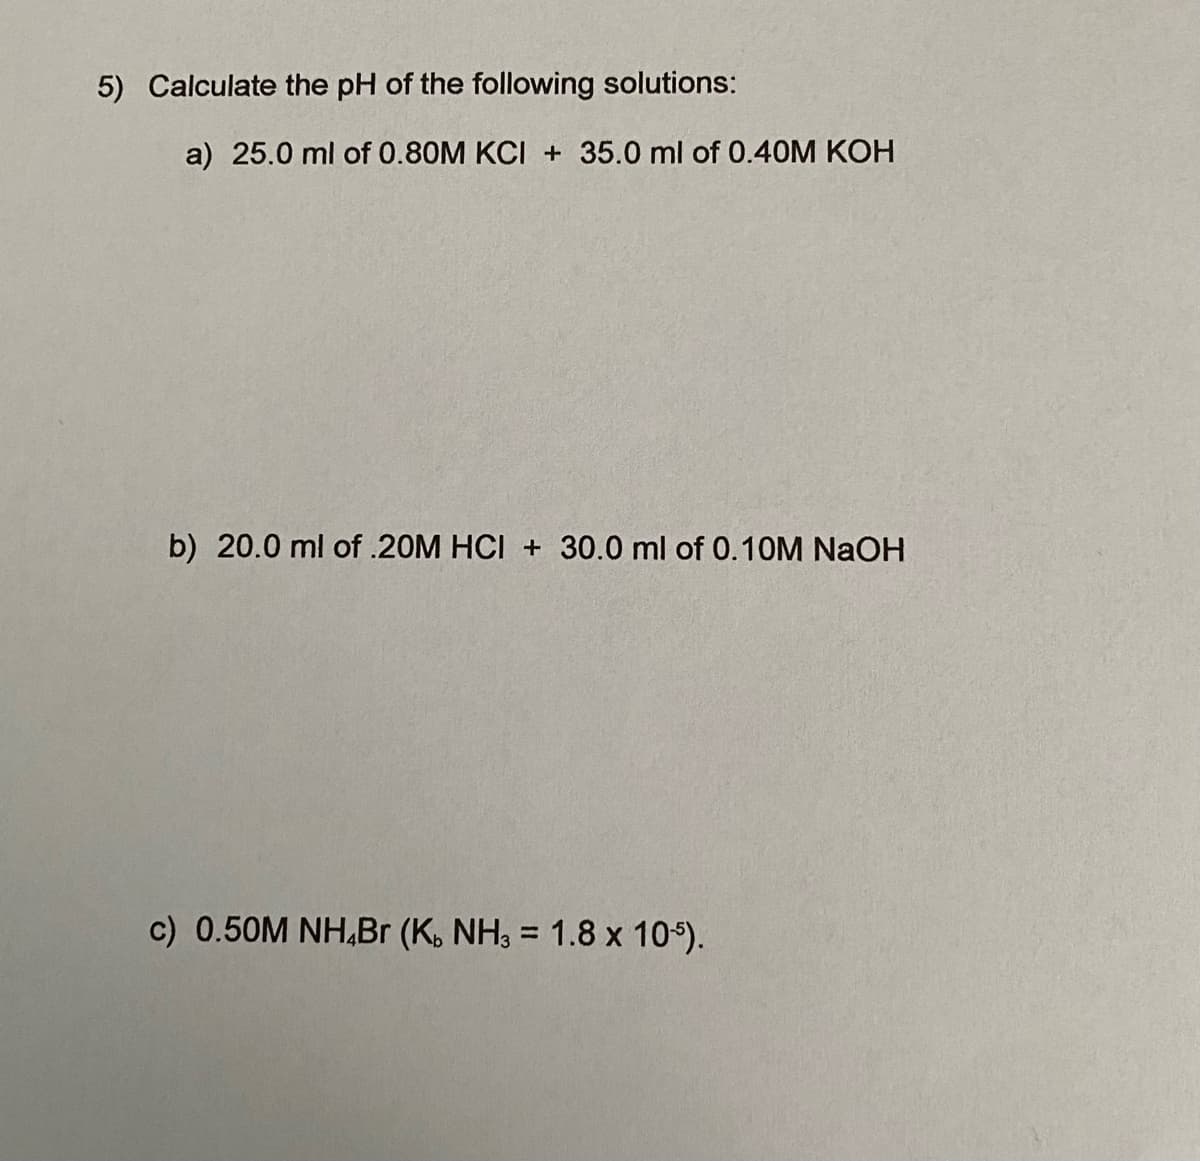 5) Calculate the pH of the following solutions:
a) 25.0 ml of 0.80M KCI + 35.0 ml of 0.40M KOH
b) 20.0 ml of .20M HCI + 30.0 ml of 0.10M NaOH
c) 0.50M NH,Br (K. NH3 = 1.8 x 104).
